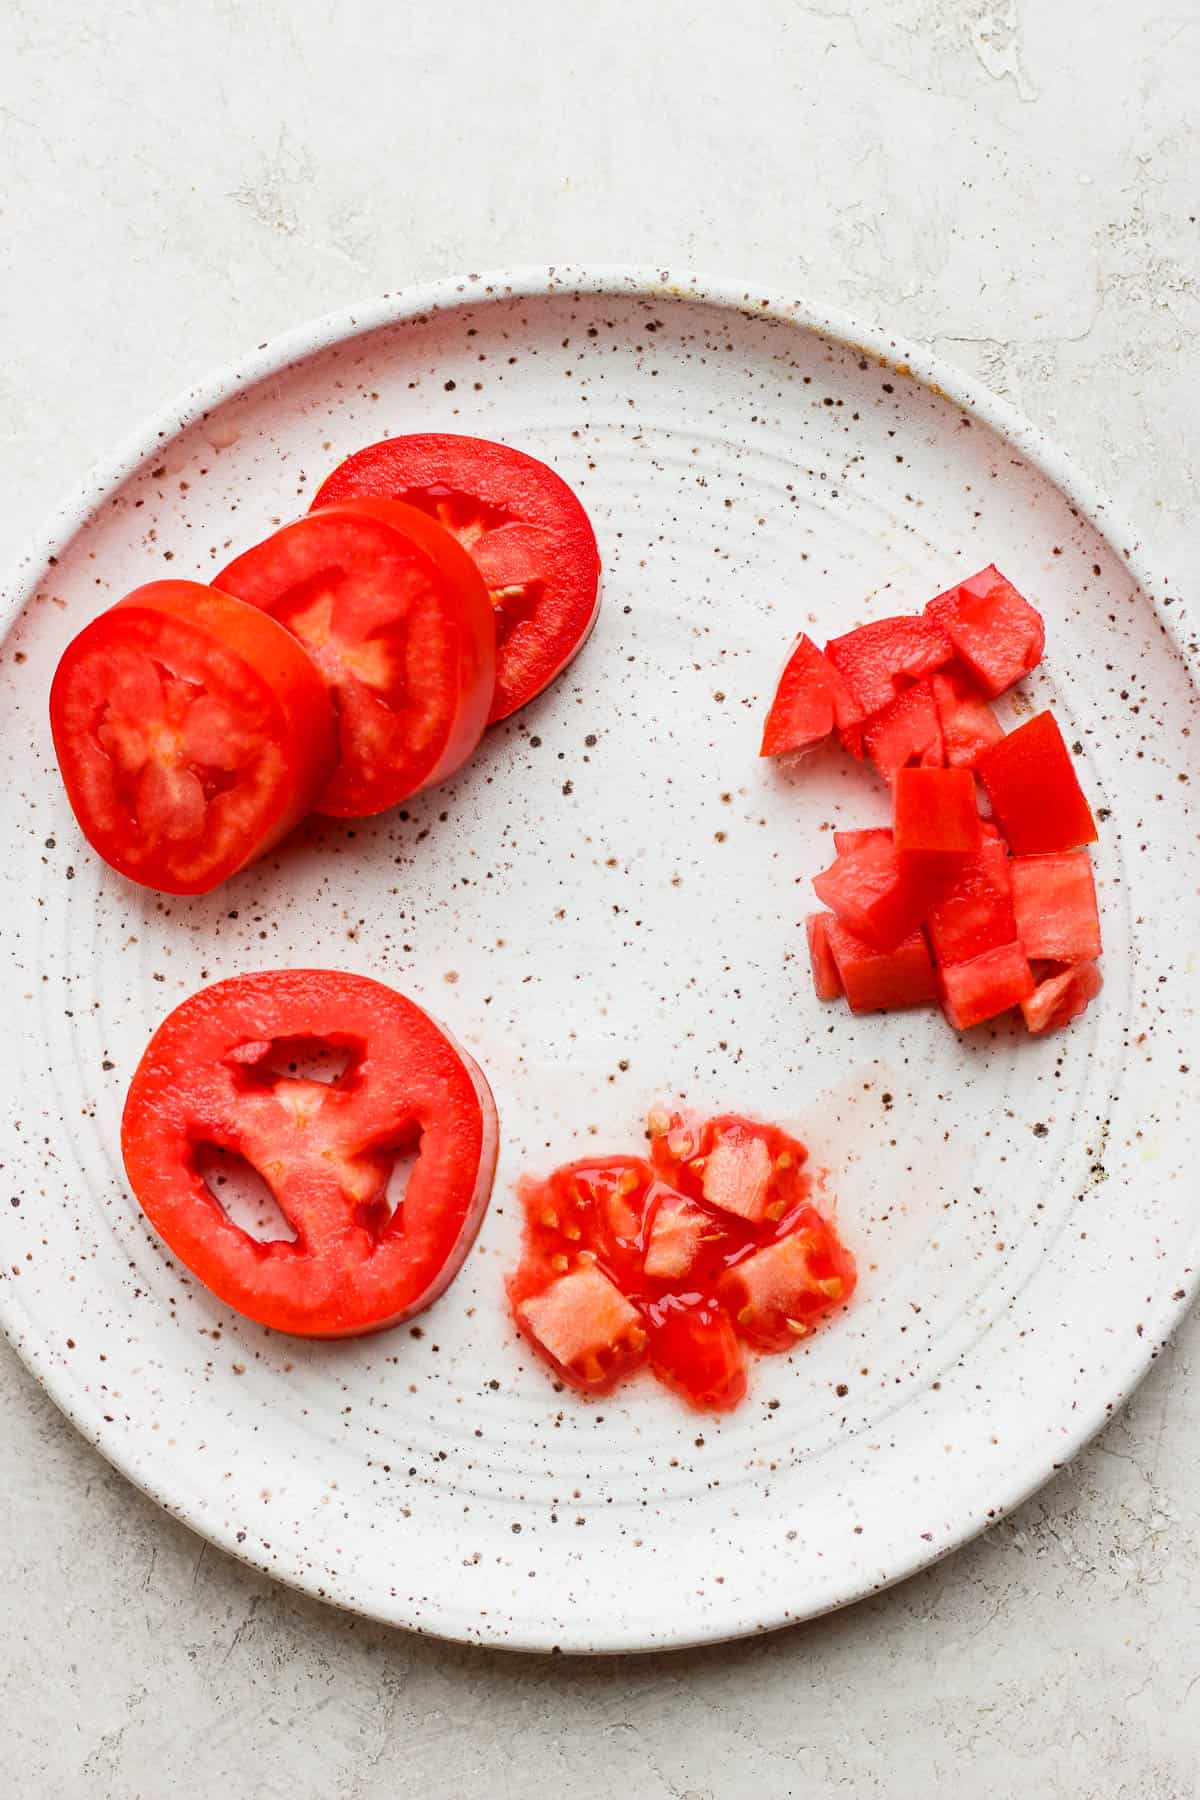 Roma tomatoes sliced and de-seeded on a plate.